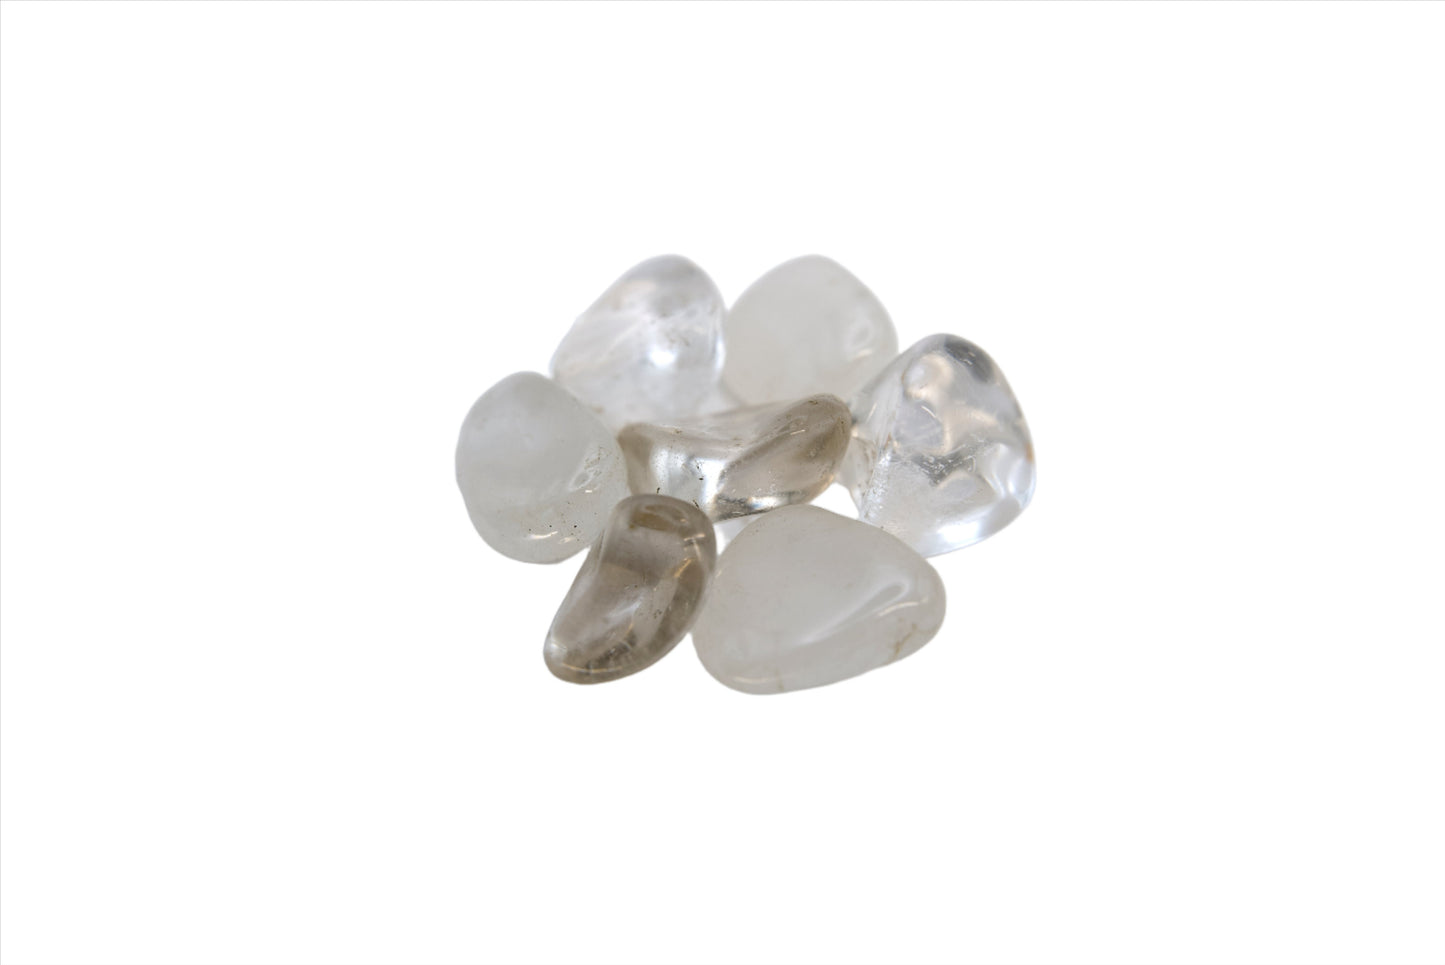 Natural, Hand-Selected Clear Quartz Tumbled Stone Individual Pieces